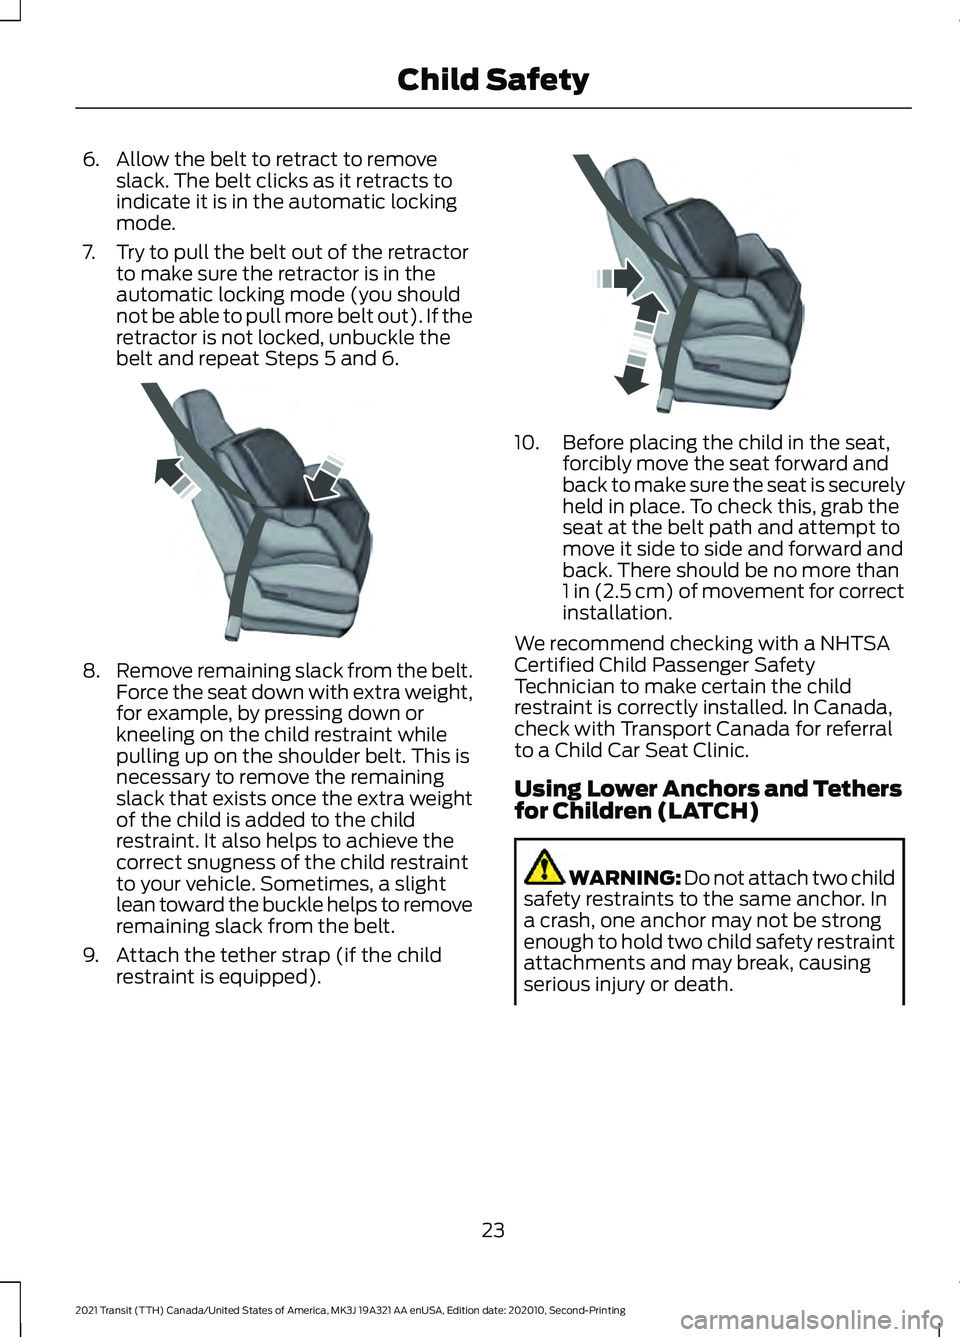 FORD TRANSIT 2021  Owners Manual 6. Allow the belt to retract to remove
slack. The belt clicks as it retracts to
indicate it is in the automatic locking
mode.
7. Try to pull the belt out of the retractor to make sure the retractor is